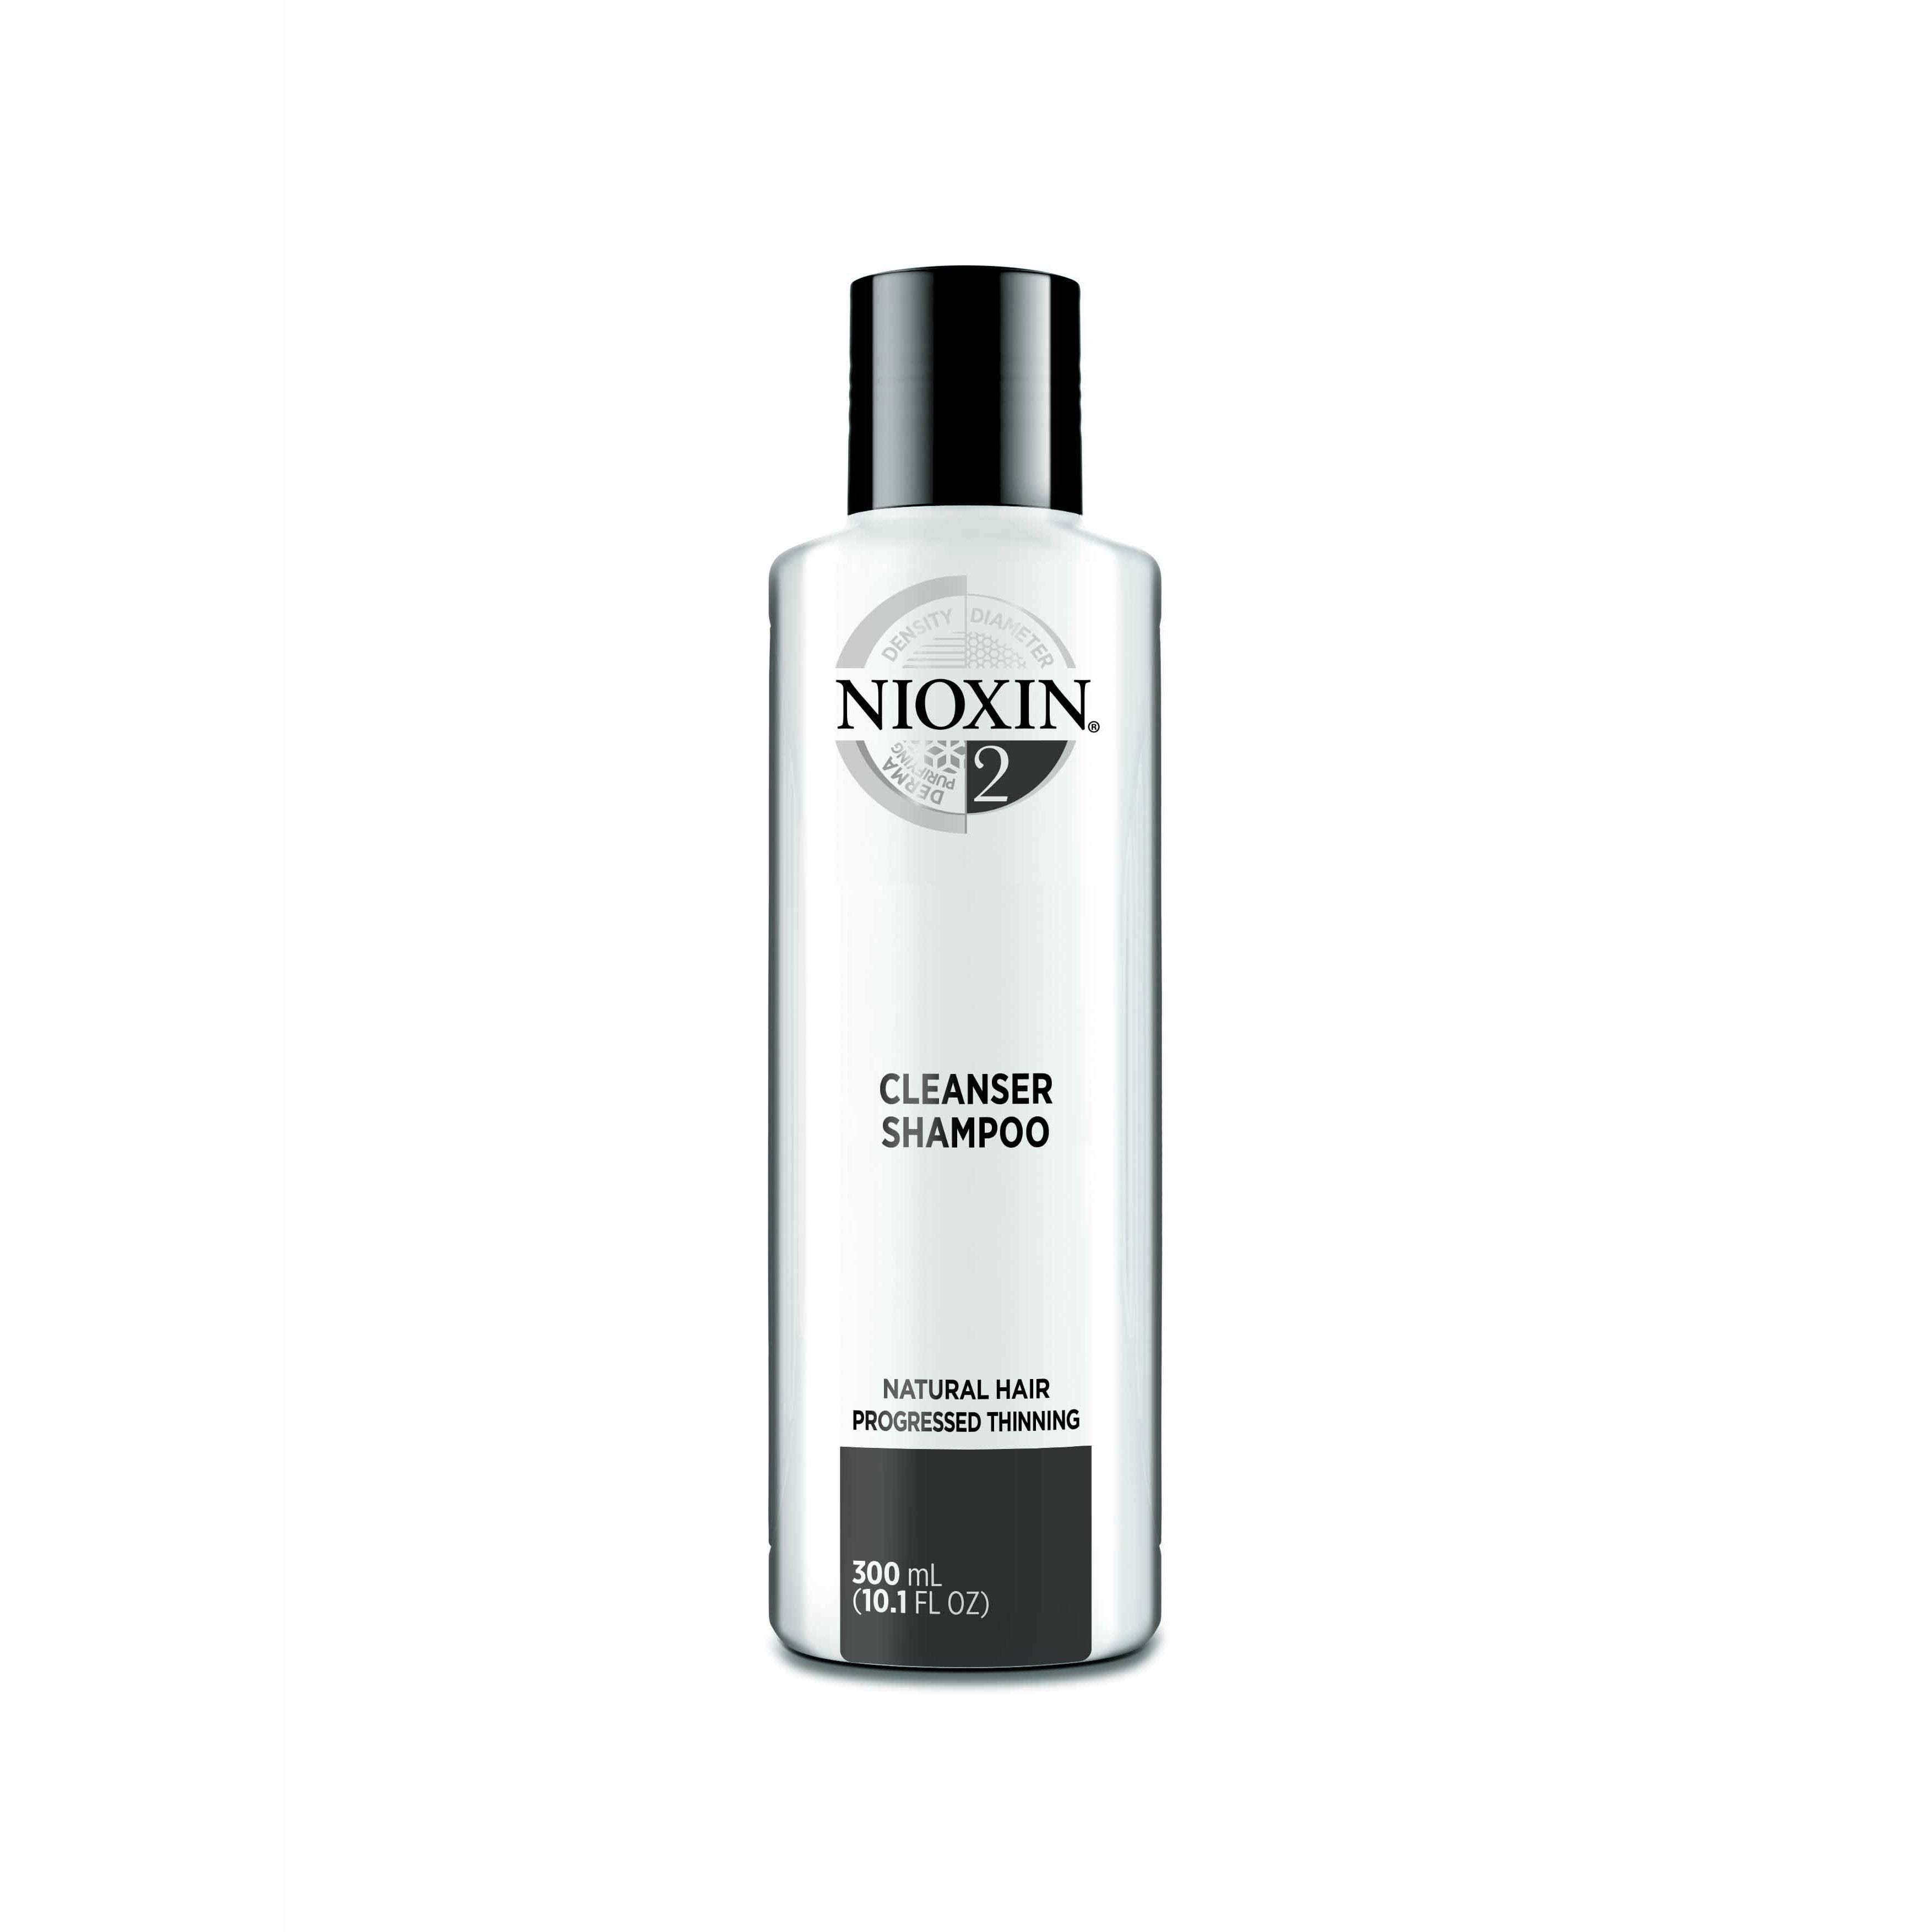 Nioxin Cleanser for Fine Hair - Noticeably Thinning, 10.1oz